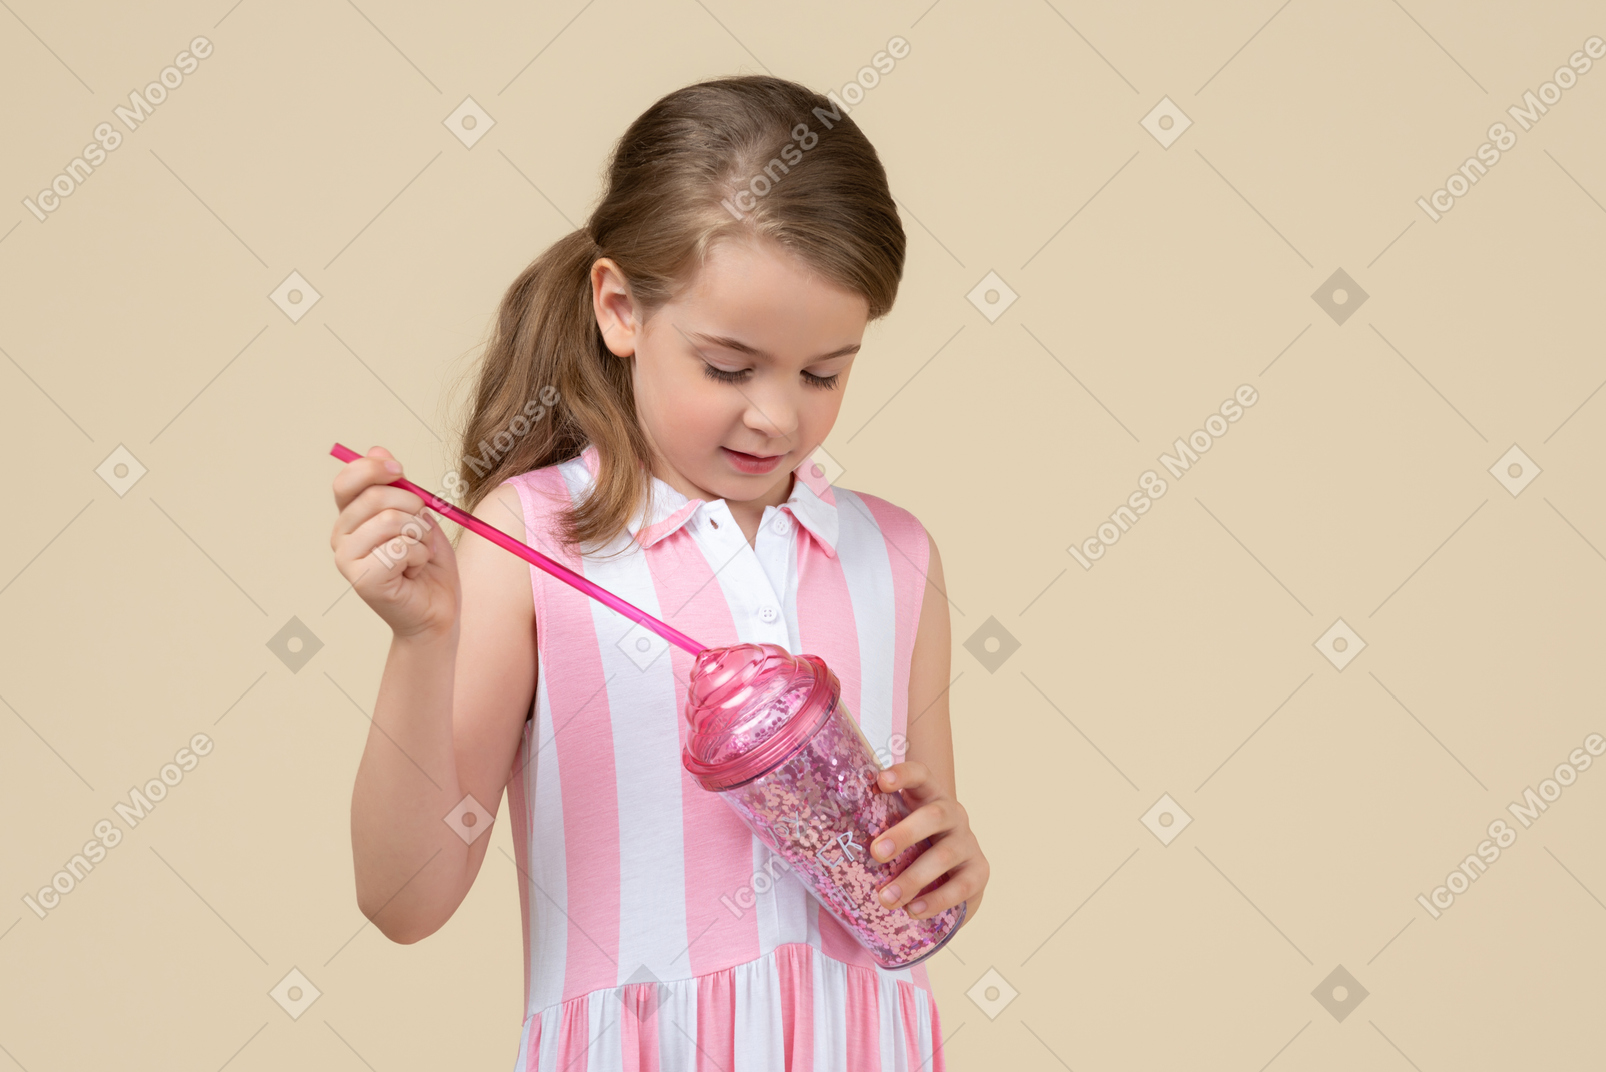 Cute little girl holding a plastic cup with a straw